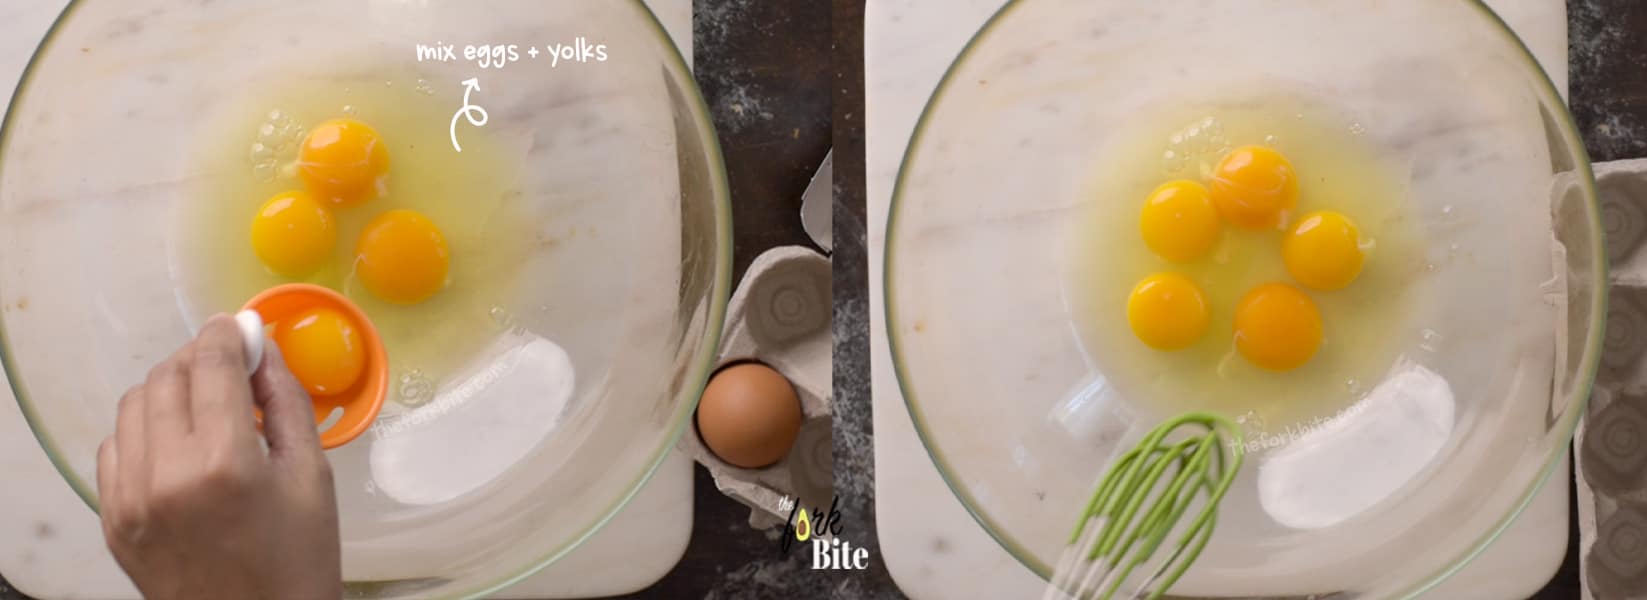 Combine 3 whole eggs and 2 egg yolks in a separate bowl. Gently whisk together until well incorporated trying not to get the eggs to become foamy.